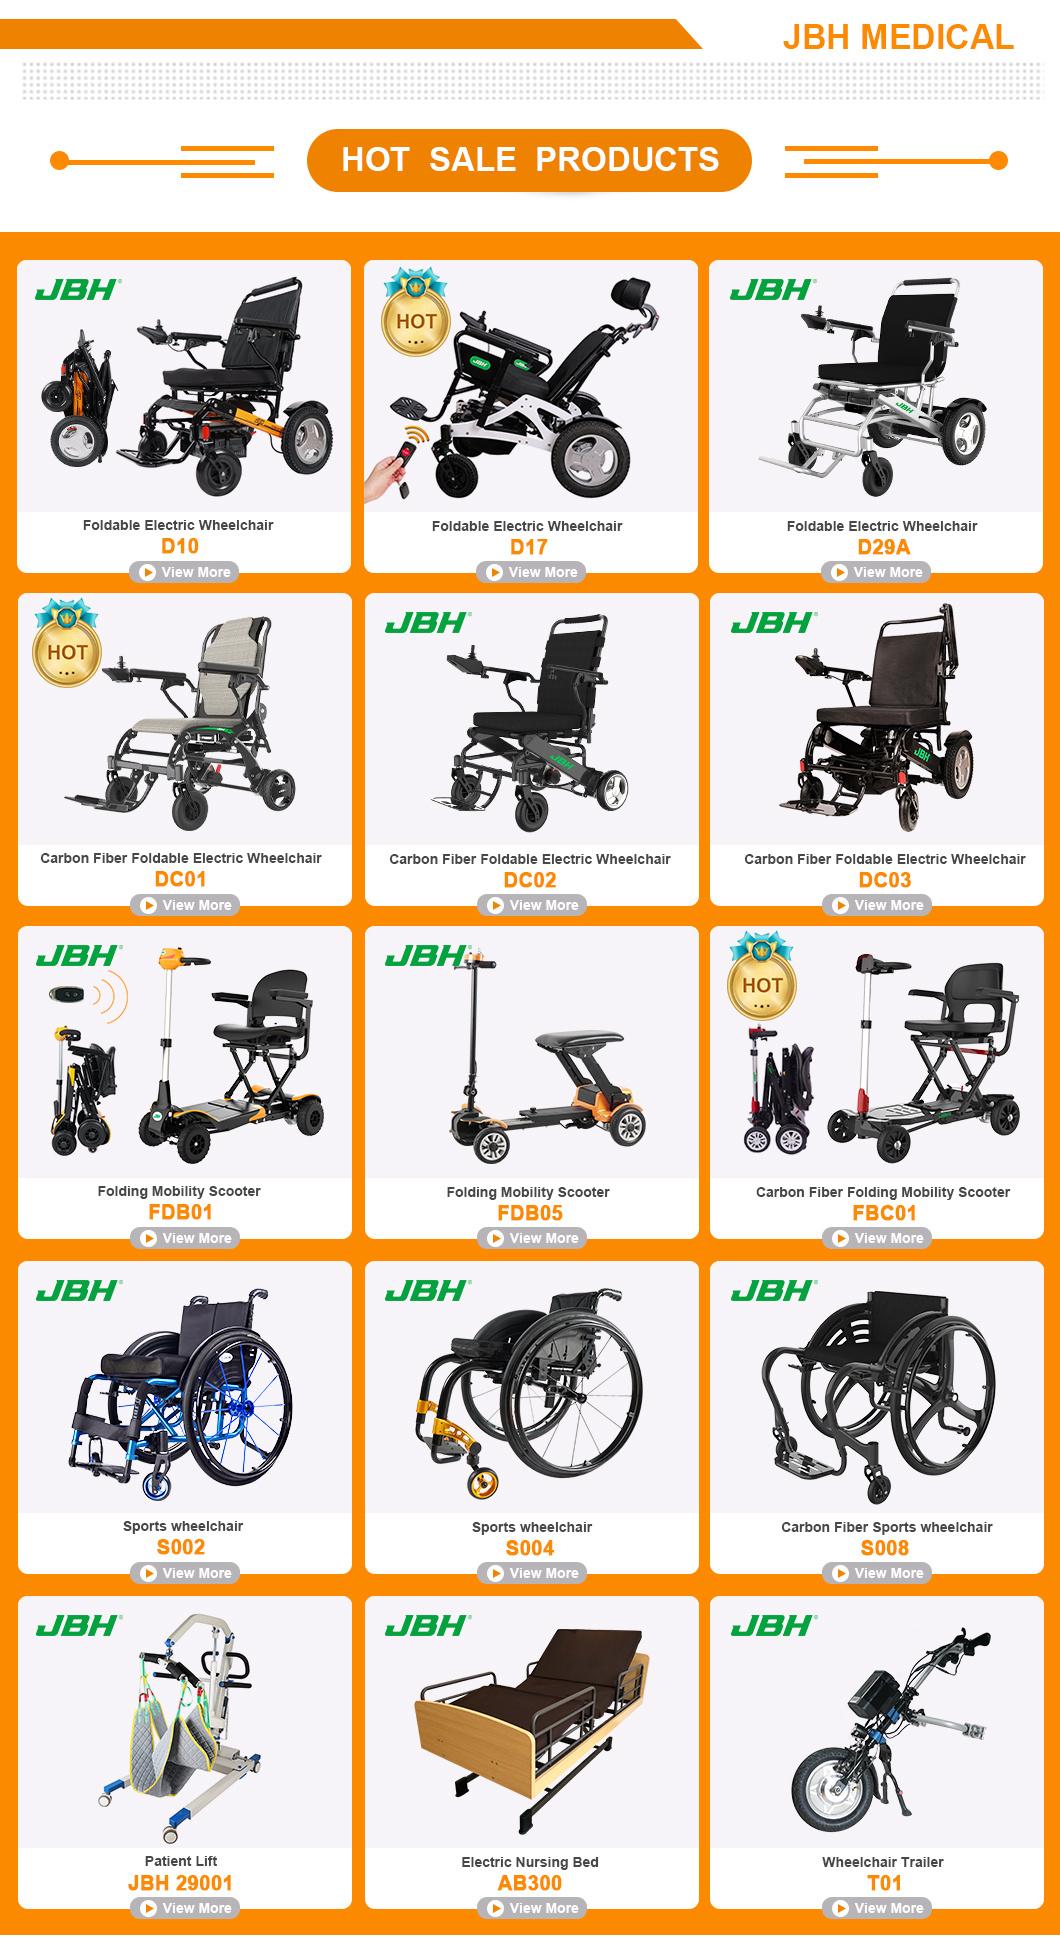 Jbh Handicapped Mobility Electric Wheelchair Supplies Prices